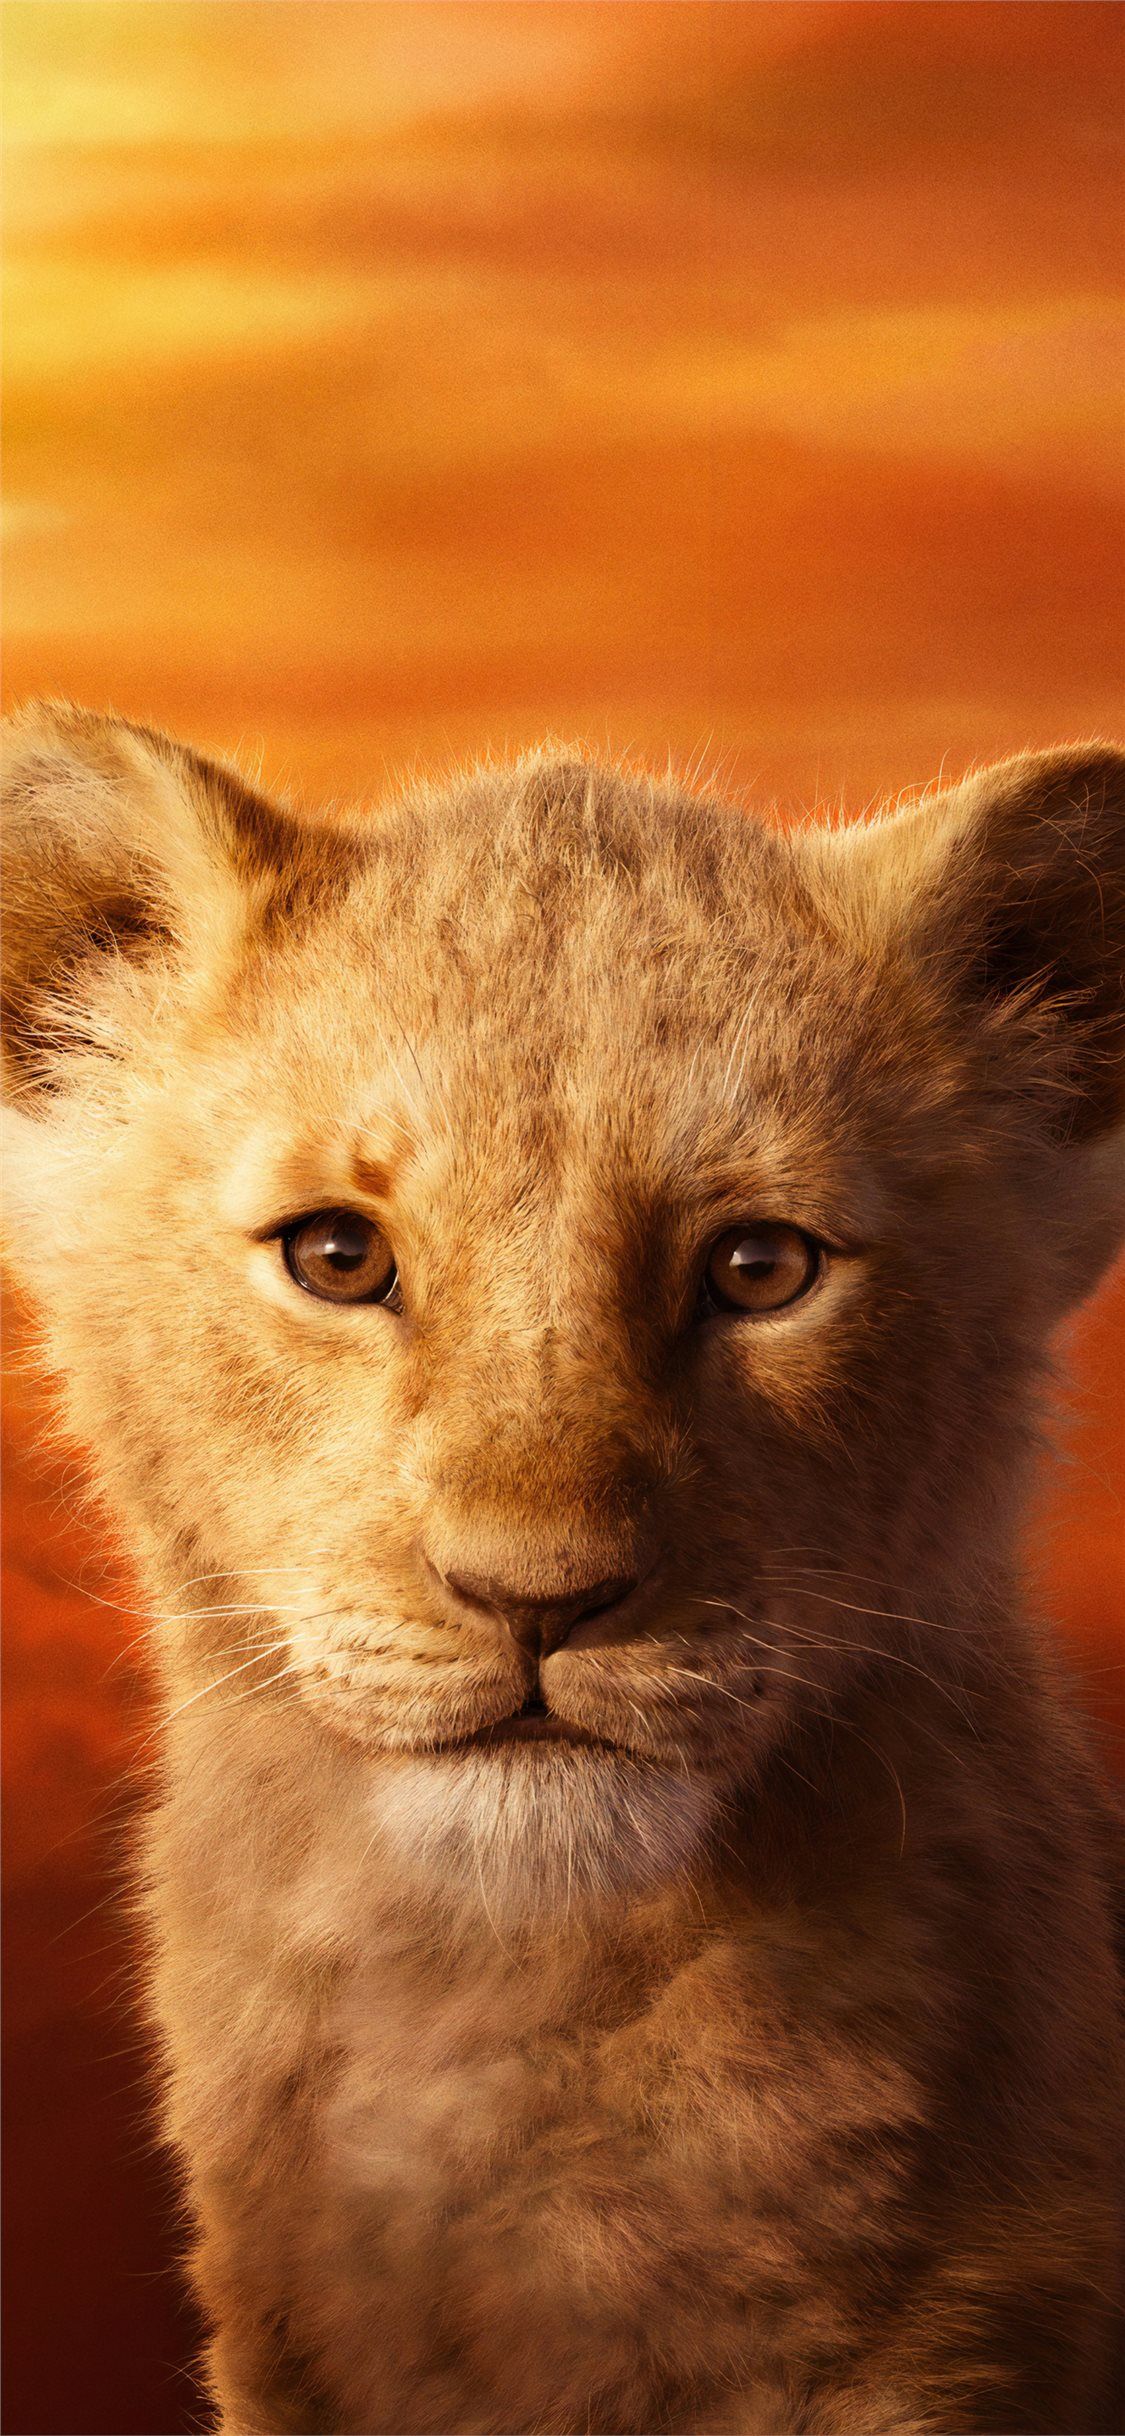 A lion cub is looking at the camera - The Lion King, lion